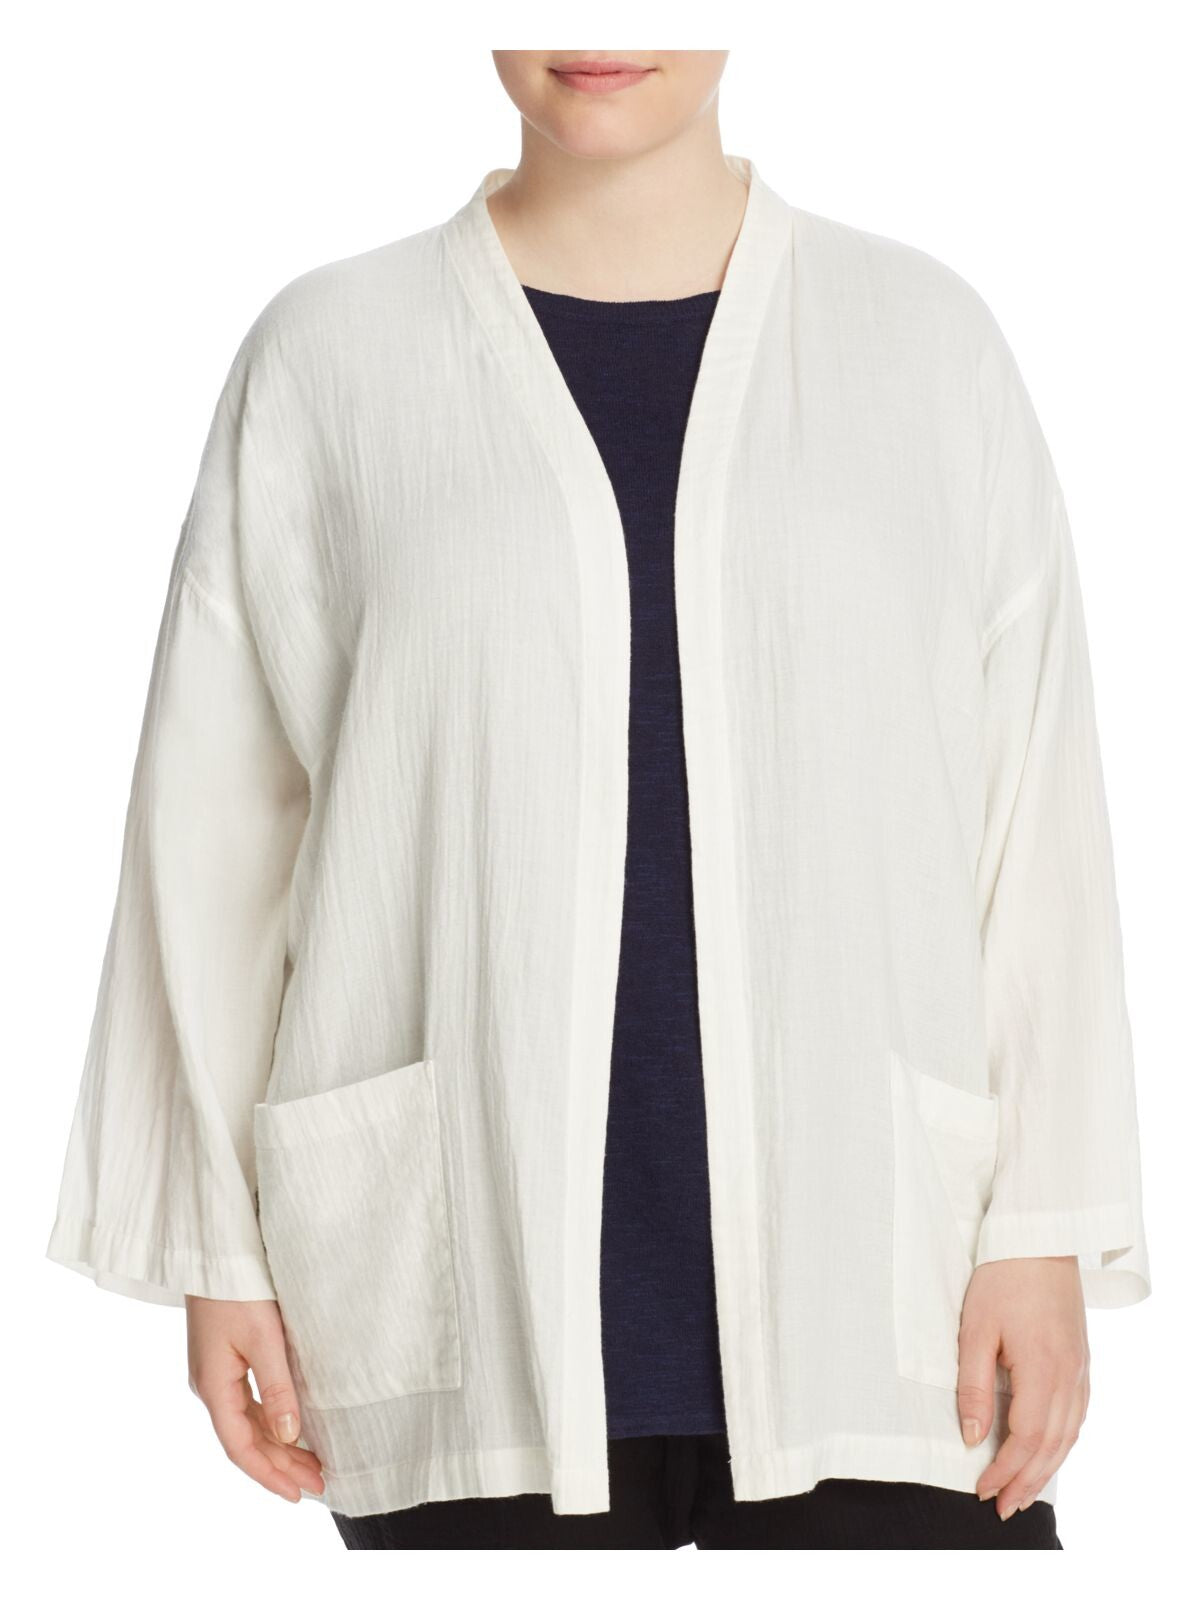 EILEEN FISHER Womens White Pocketed Long Sleeve Open Cardigan Sweater Plus 2X